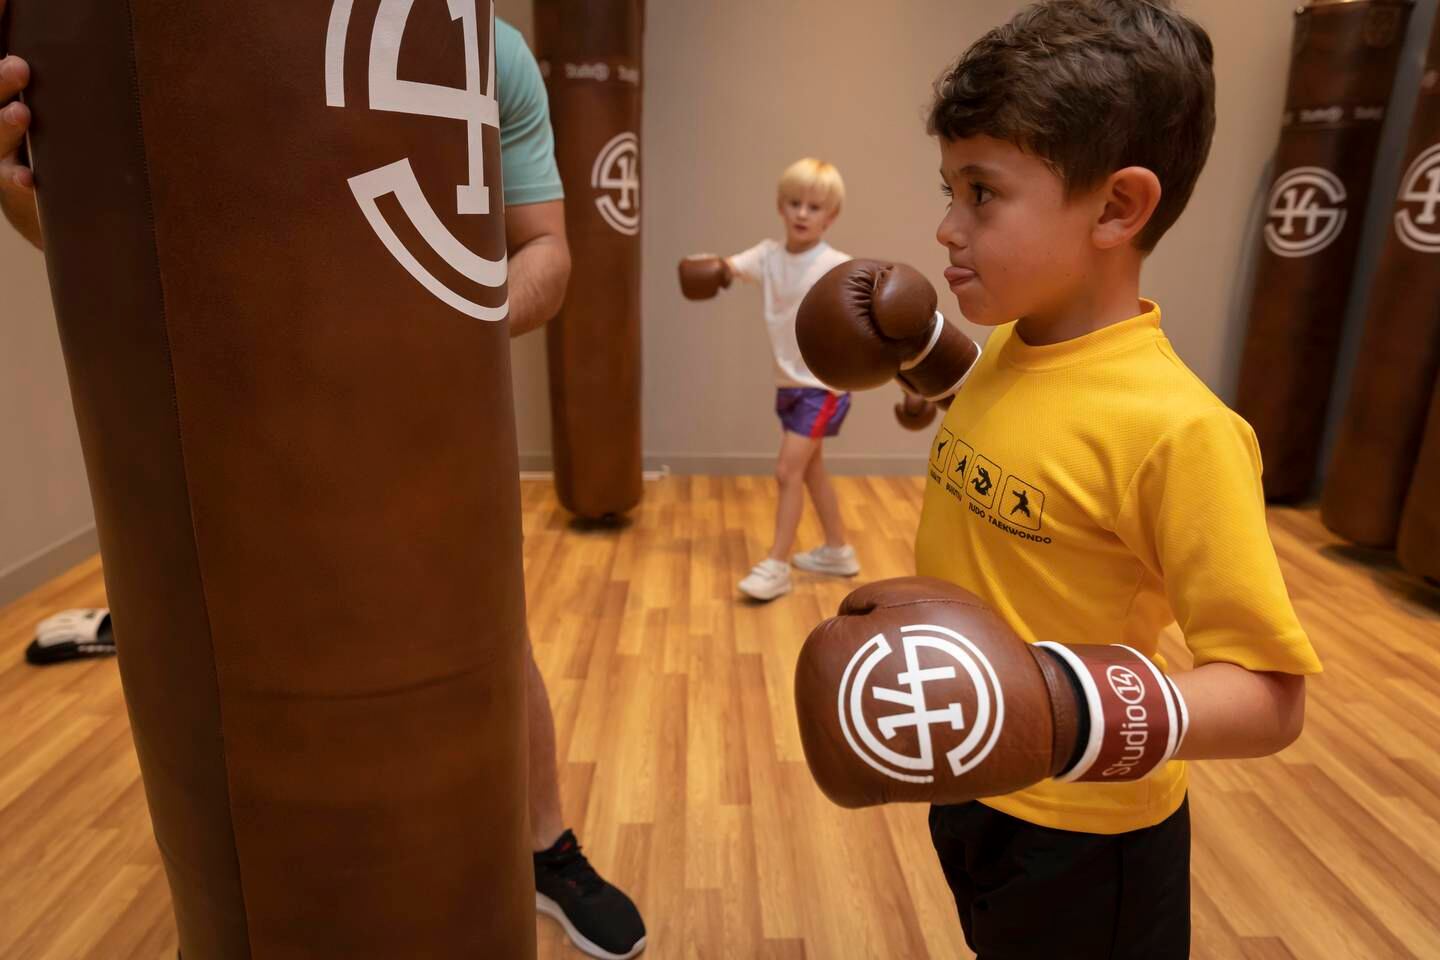 eco-friendly fitness space for children and adults opens in Dubai